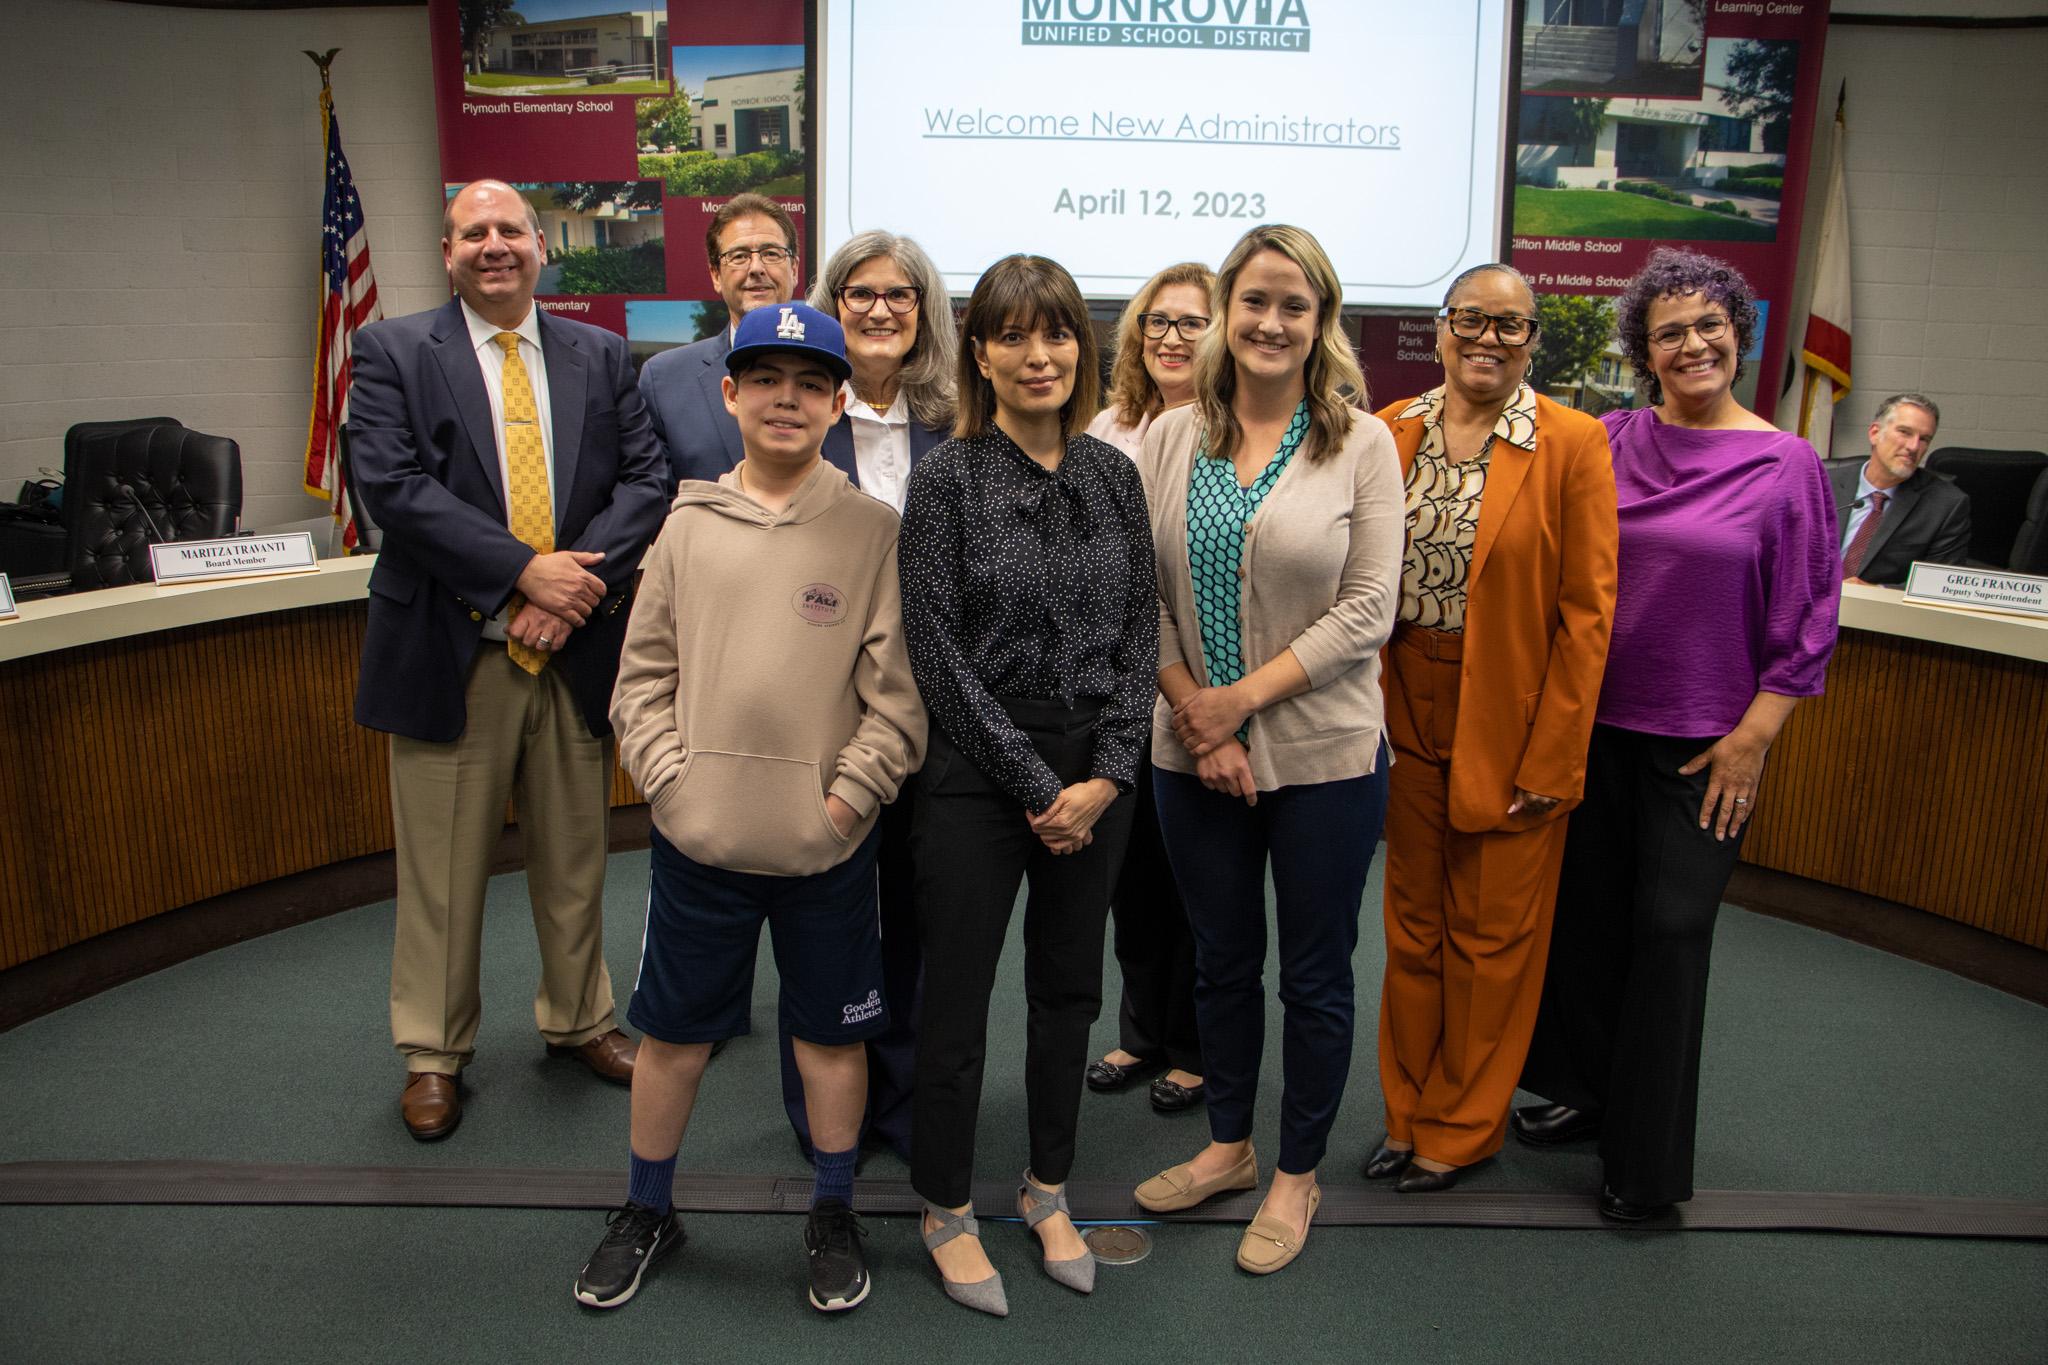 Board Members welcomed two new assistant principals to the Monrovia Unified family at the Middle and High School levels. Morena Tejada-Fisher was introduced as the new MHS AP, and Ashley Leone was welcomed as the new AP for Clifton Middle School.